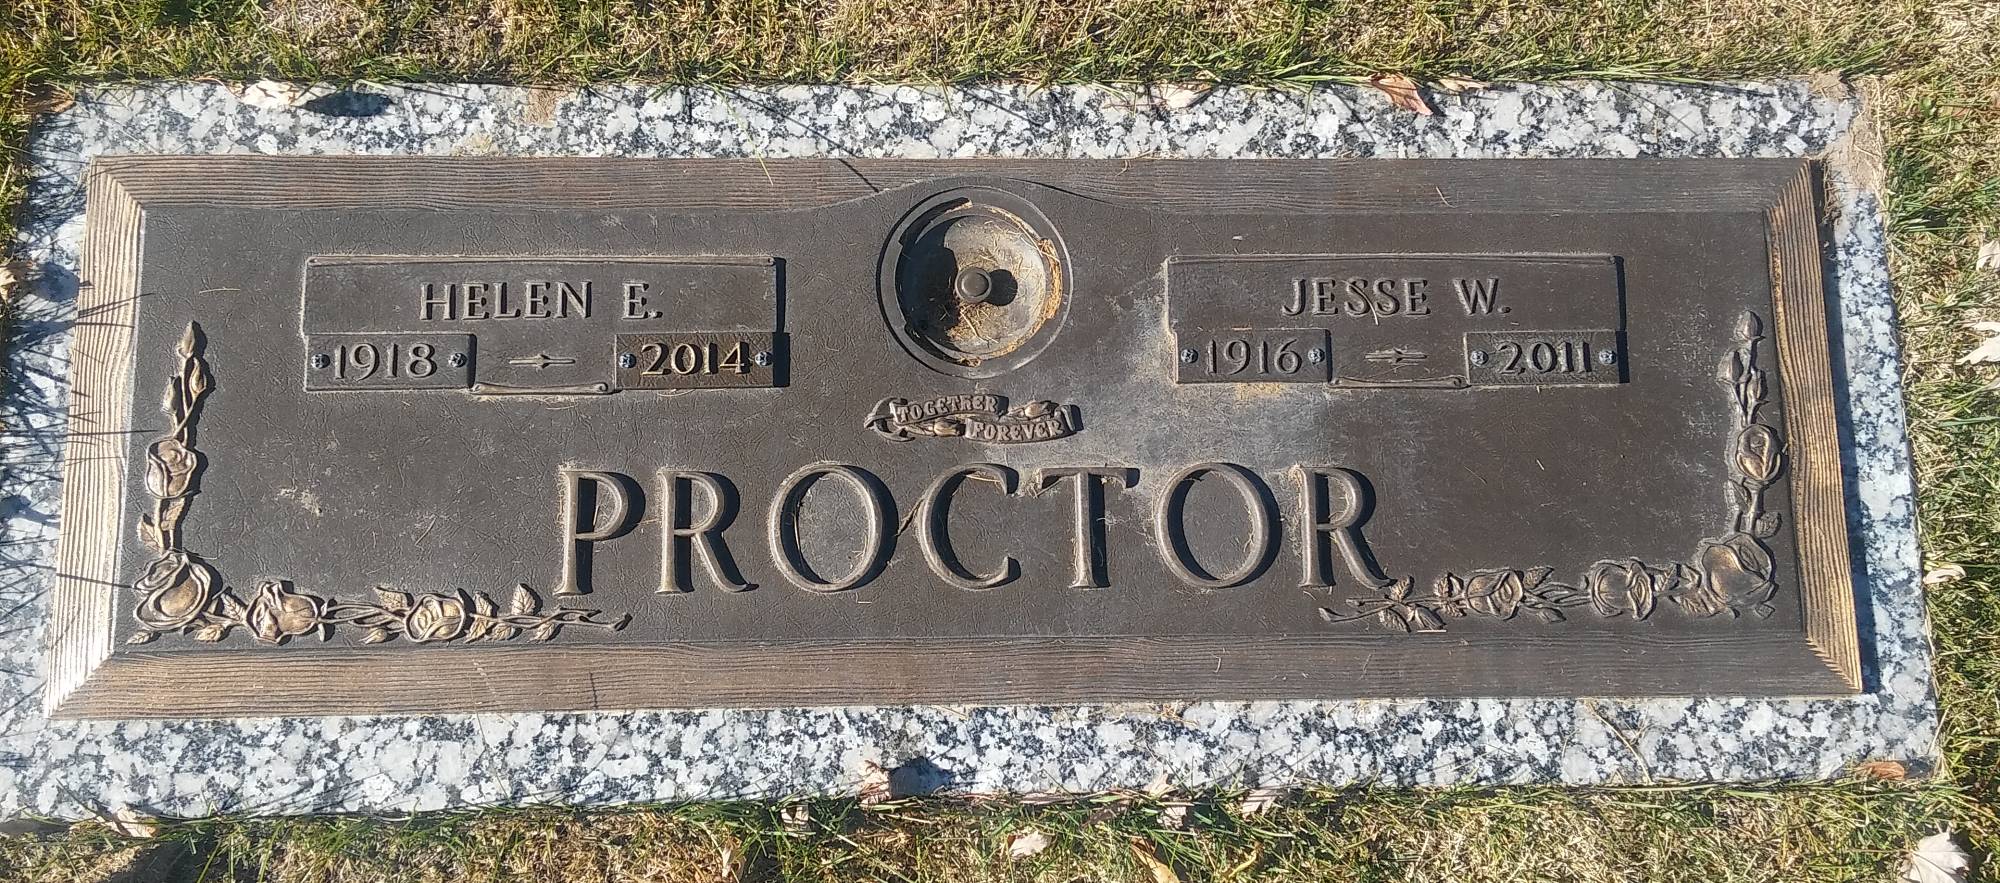 Picture for Helen and Jesse Proctor